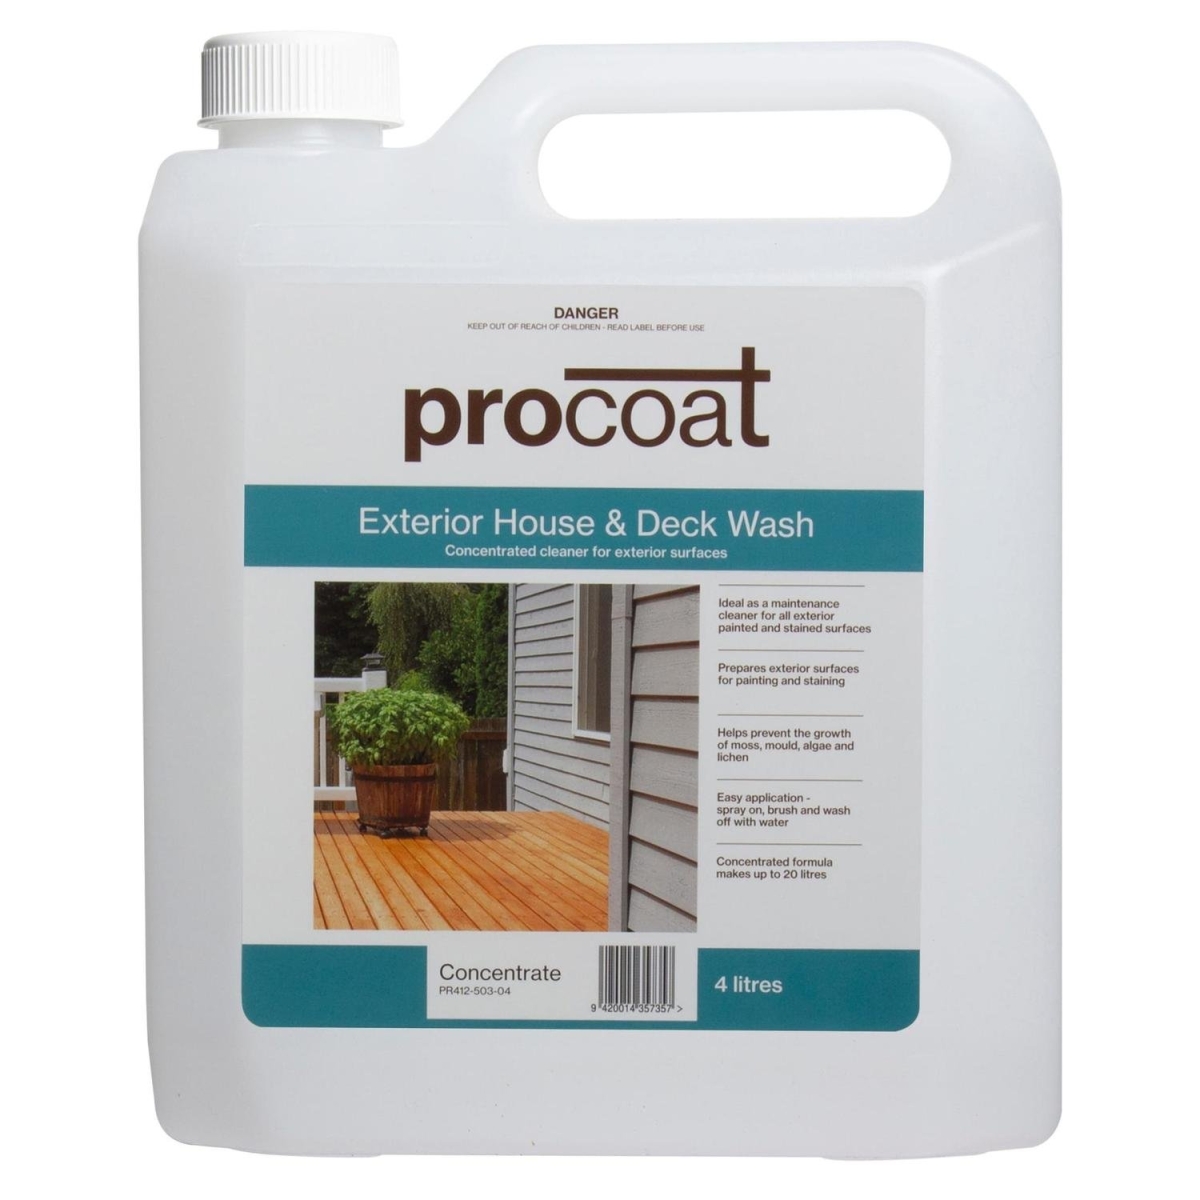 Procoat Deck and Exterior House Wash 4 litre